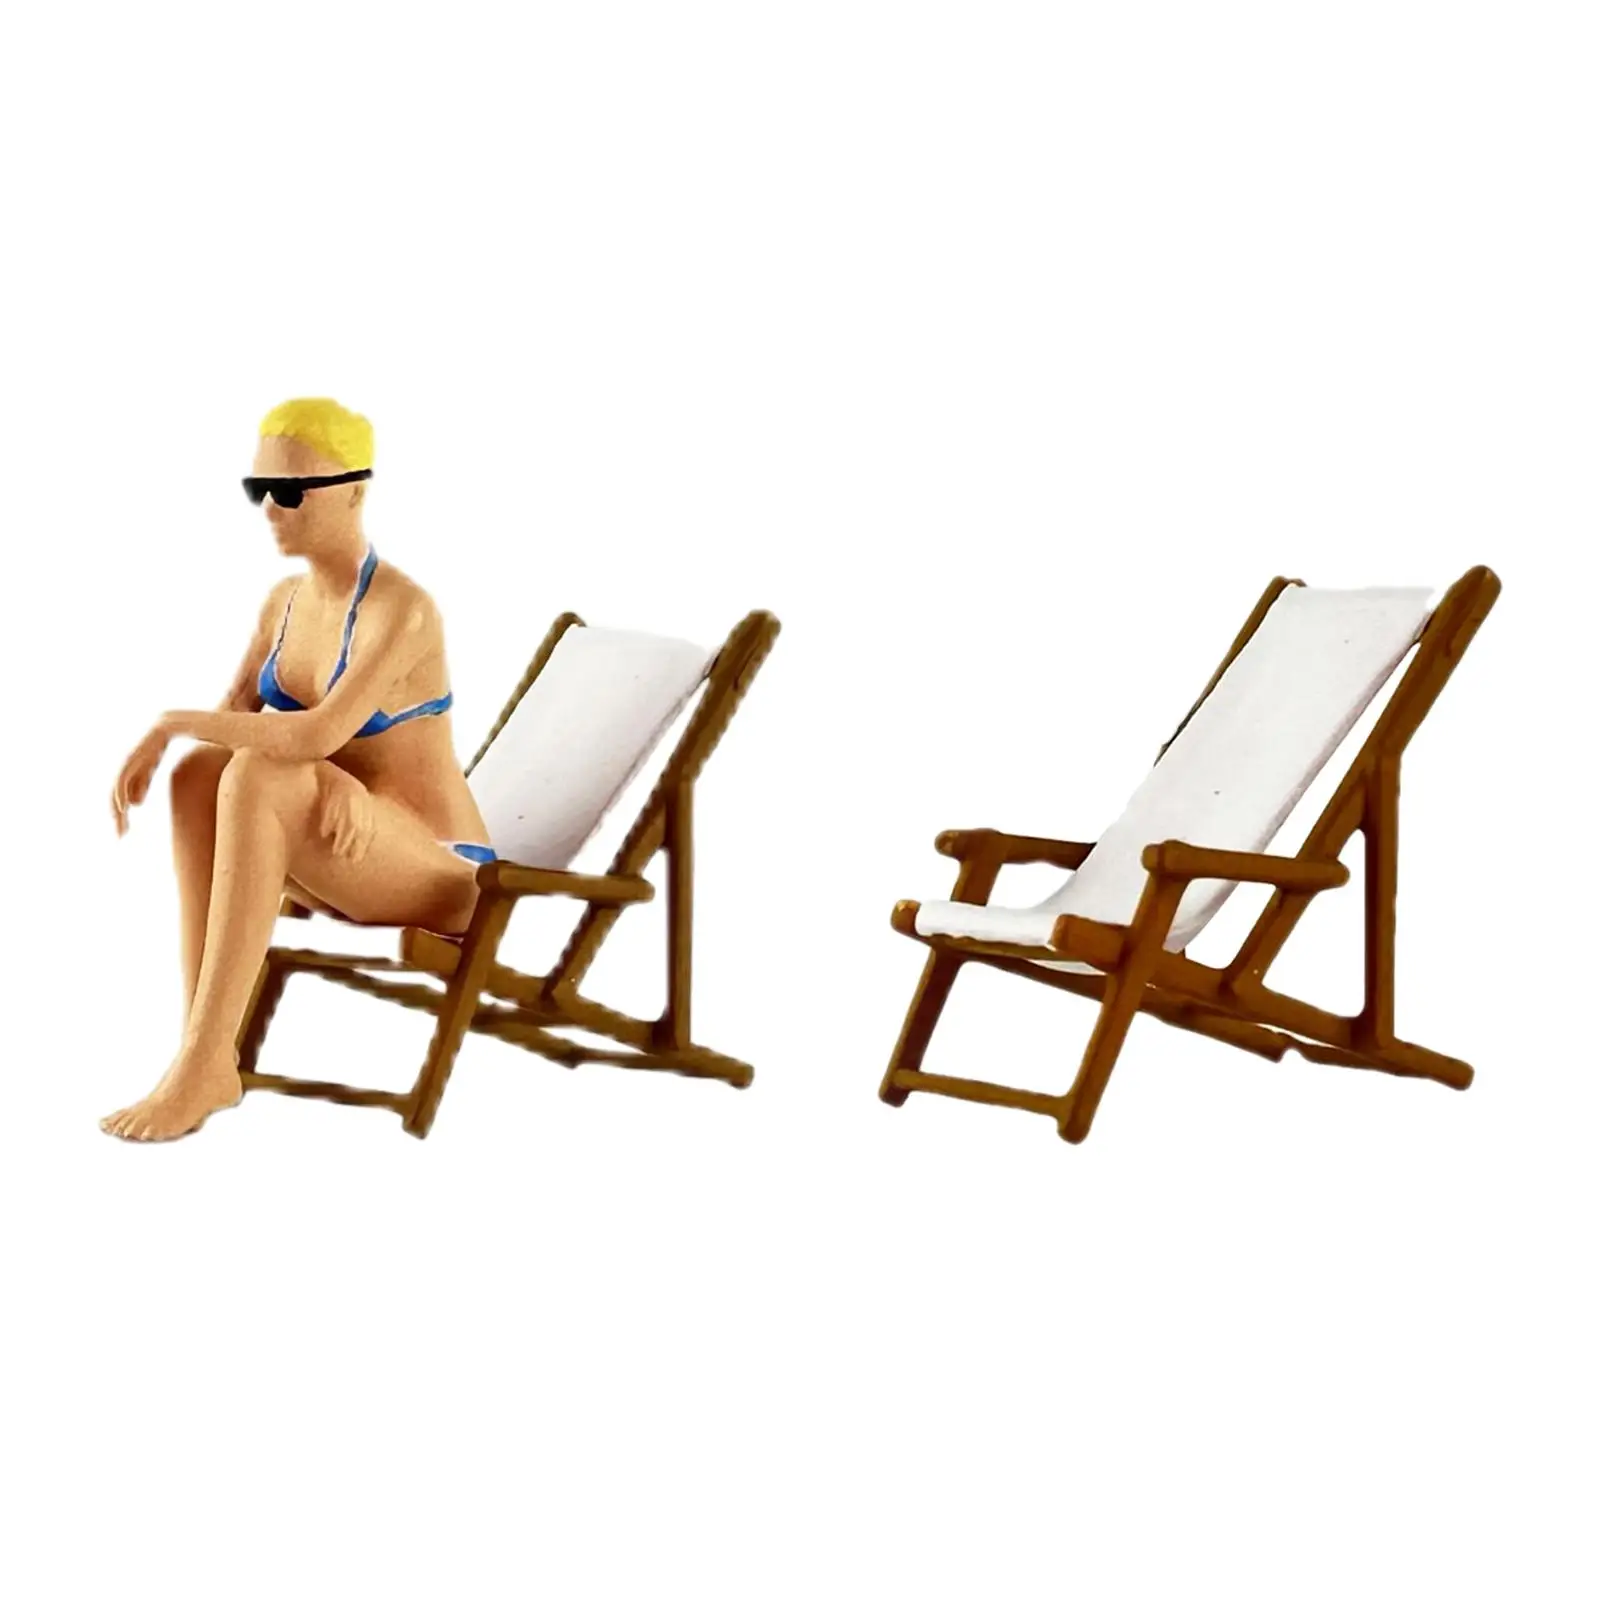 1/64 Scale Diorama Figure Painted Lounge Chair Model for DIY Projects Doll House Decoration Architecture Model Kids Adults Gifts